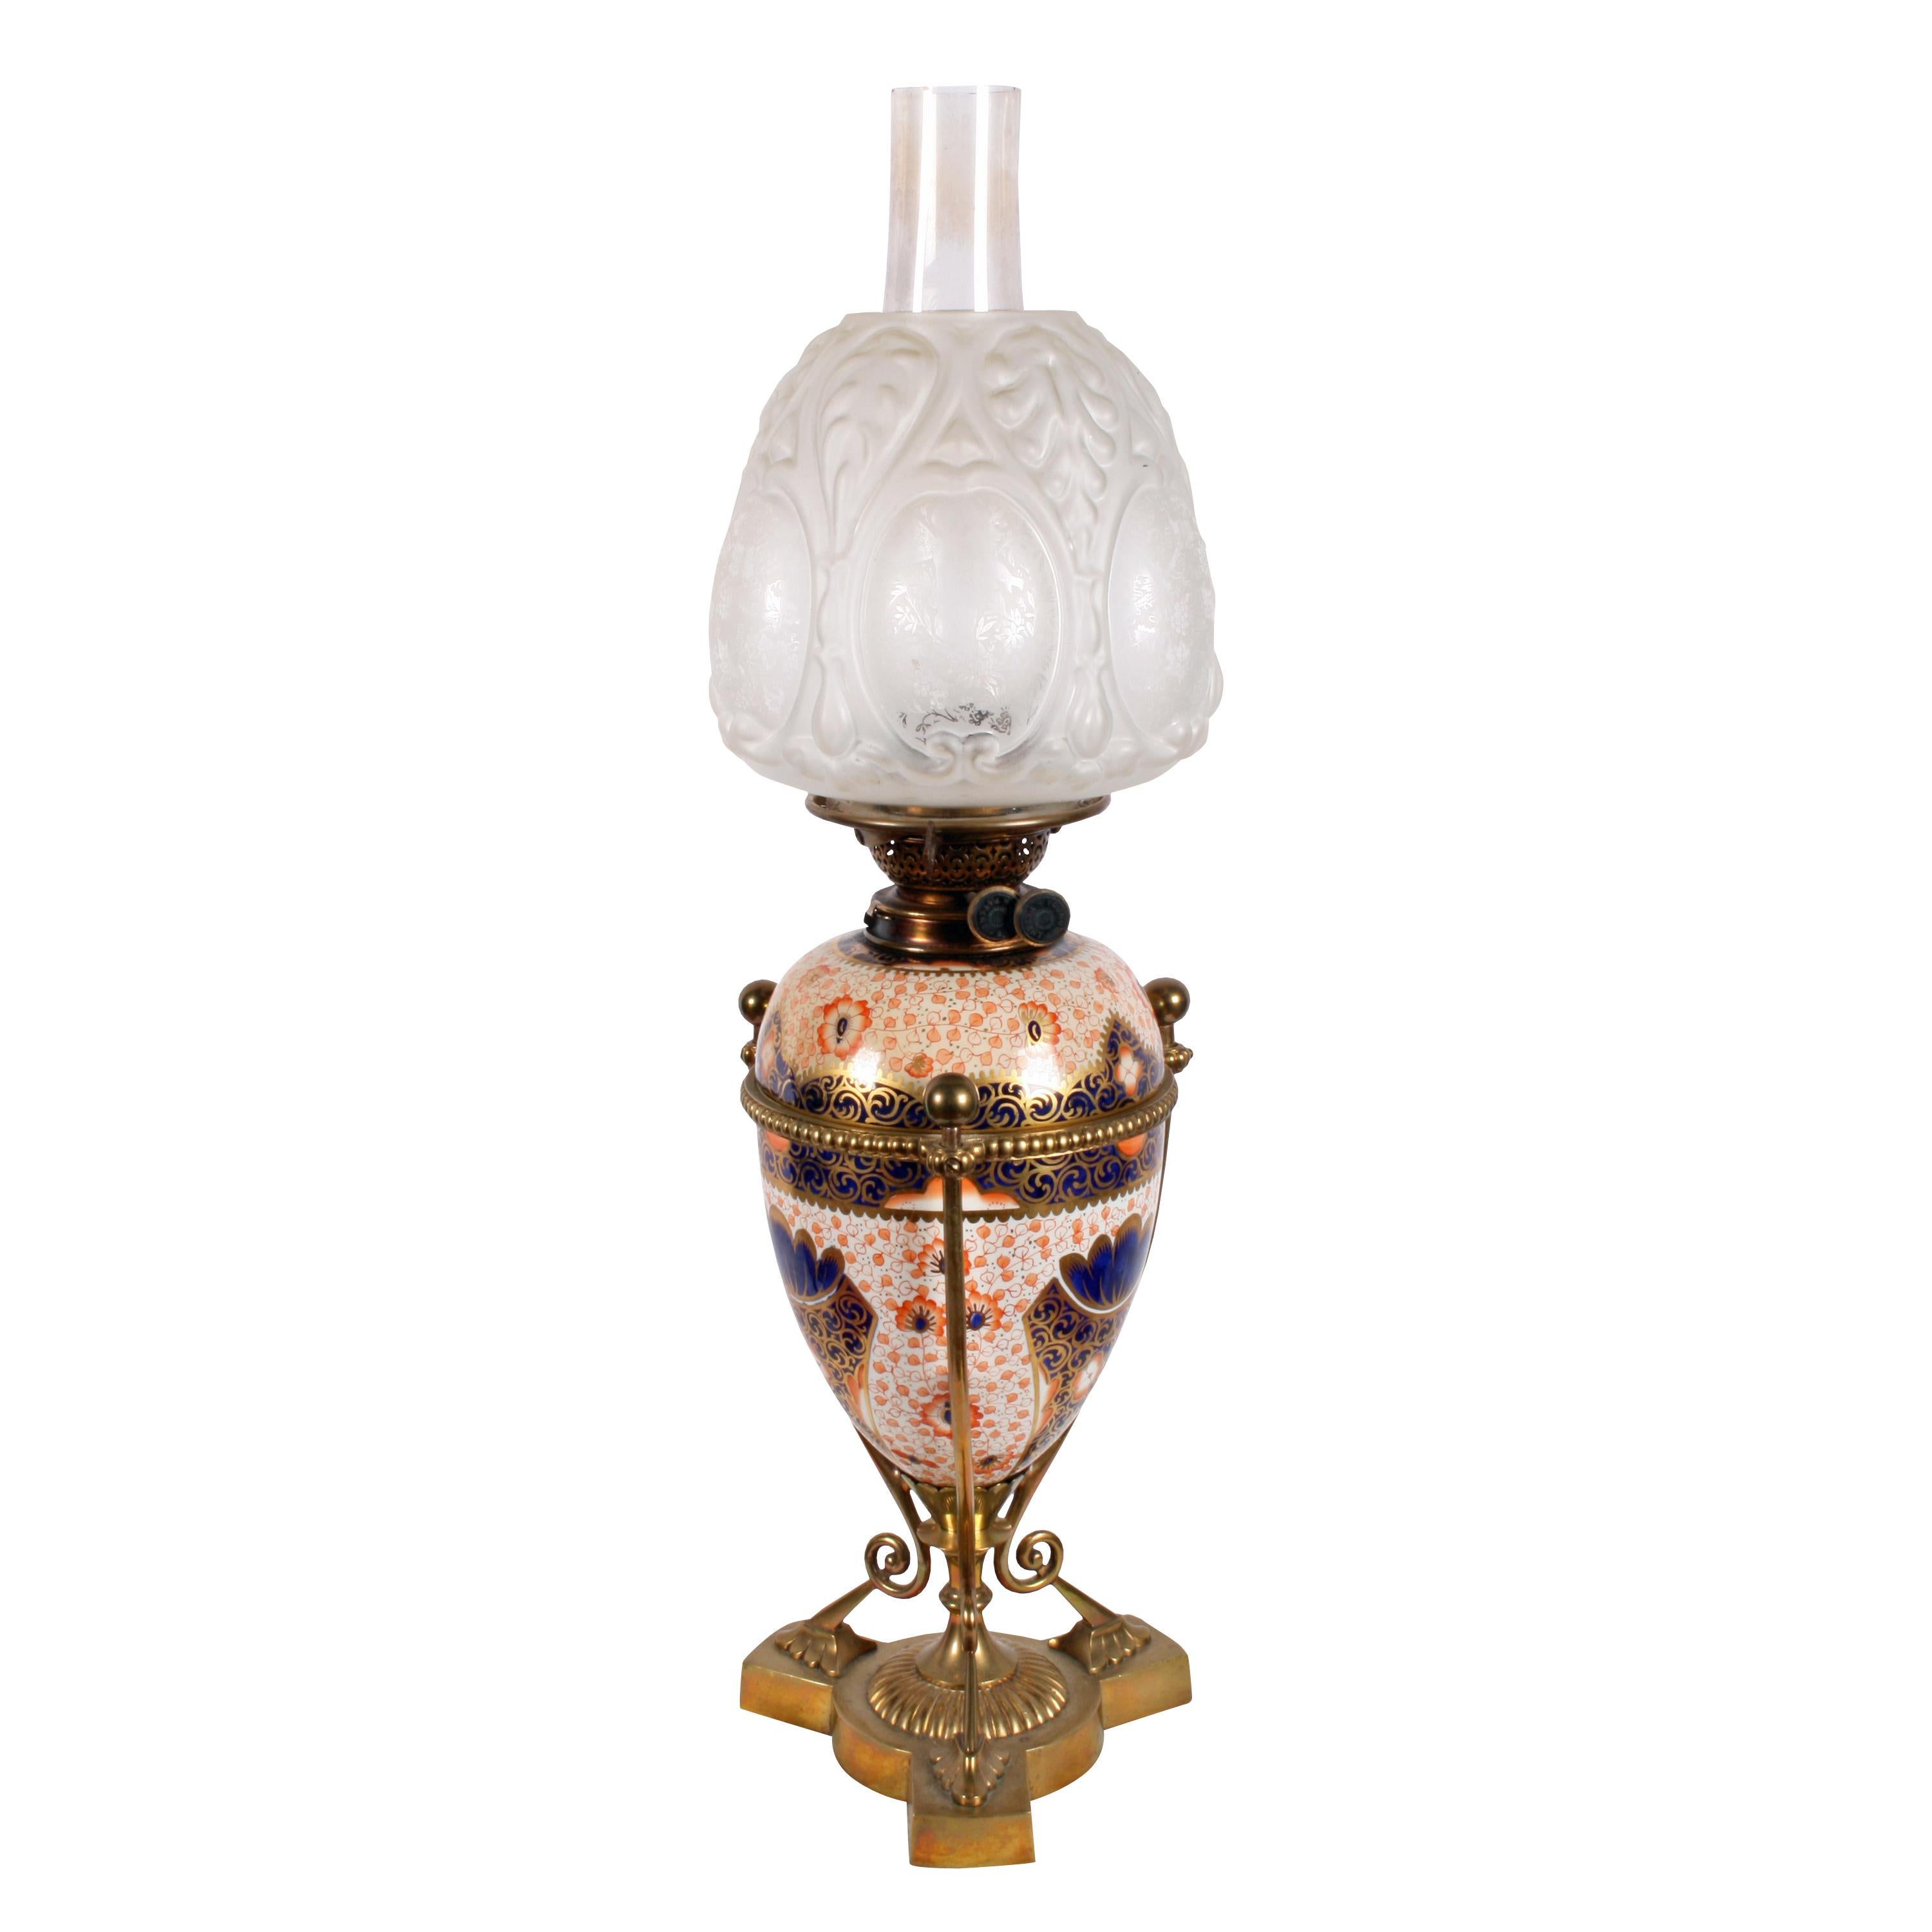 Victorian pottery oil lamp.


A fine example of a Victorian Staffordshire pottery oil lamp.

The lamp is held in a brass frame, the pottery is decorated with dark blue and red pattern on a white background and highlighted in gilt.

The top